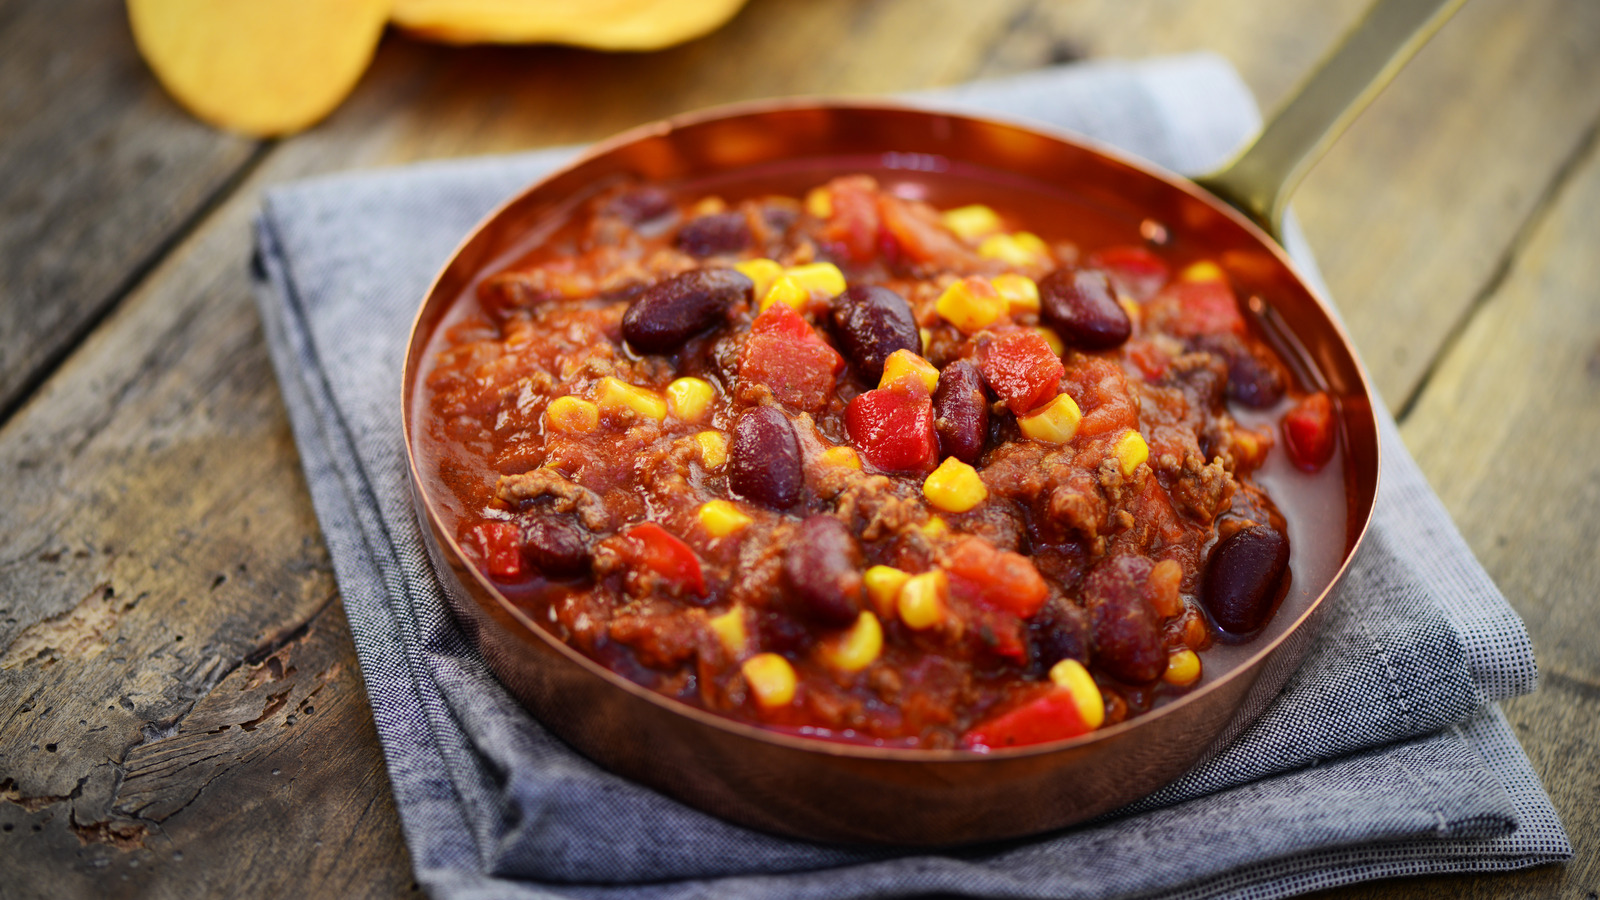 The Origins Of Chili Are Steeped In Myth And Legend